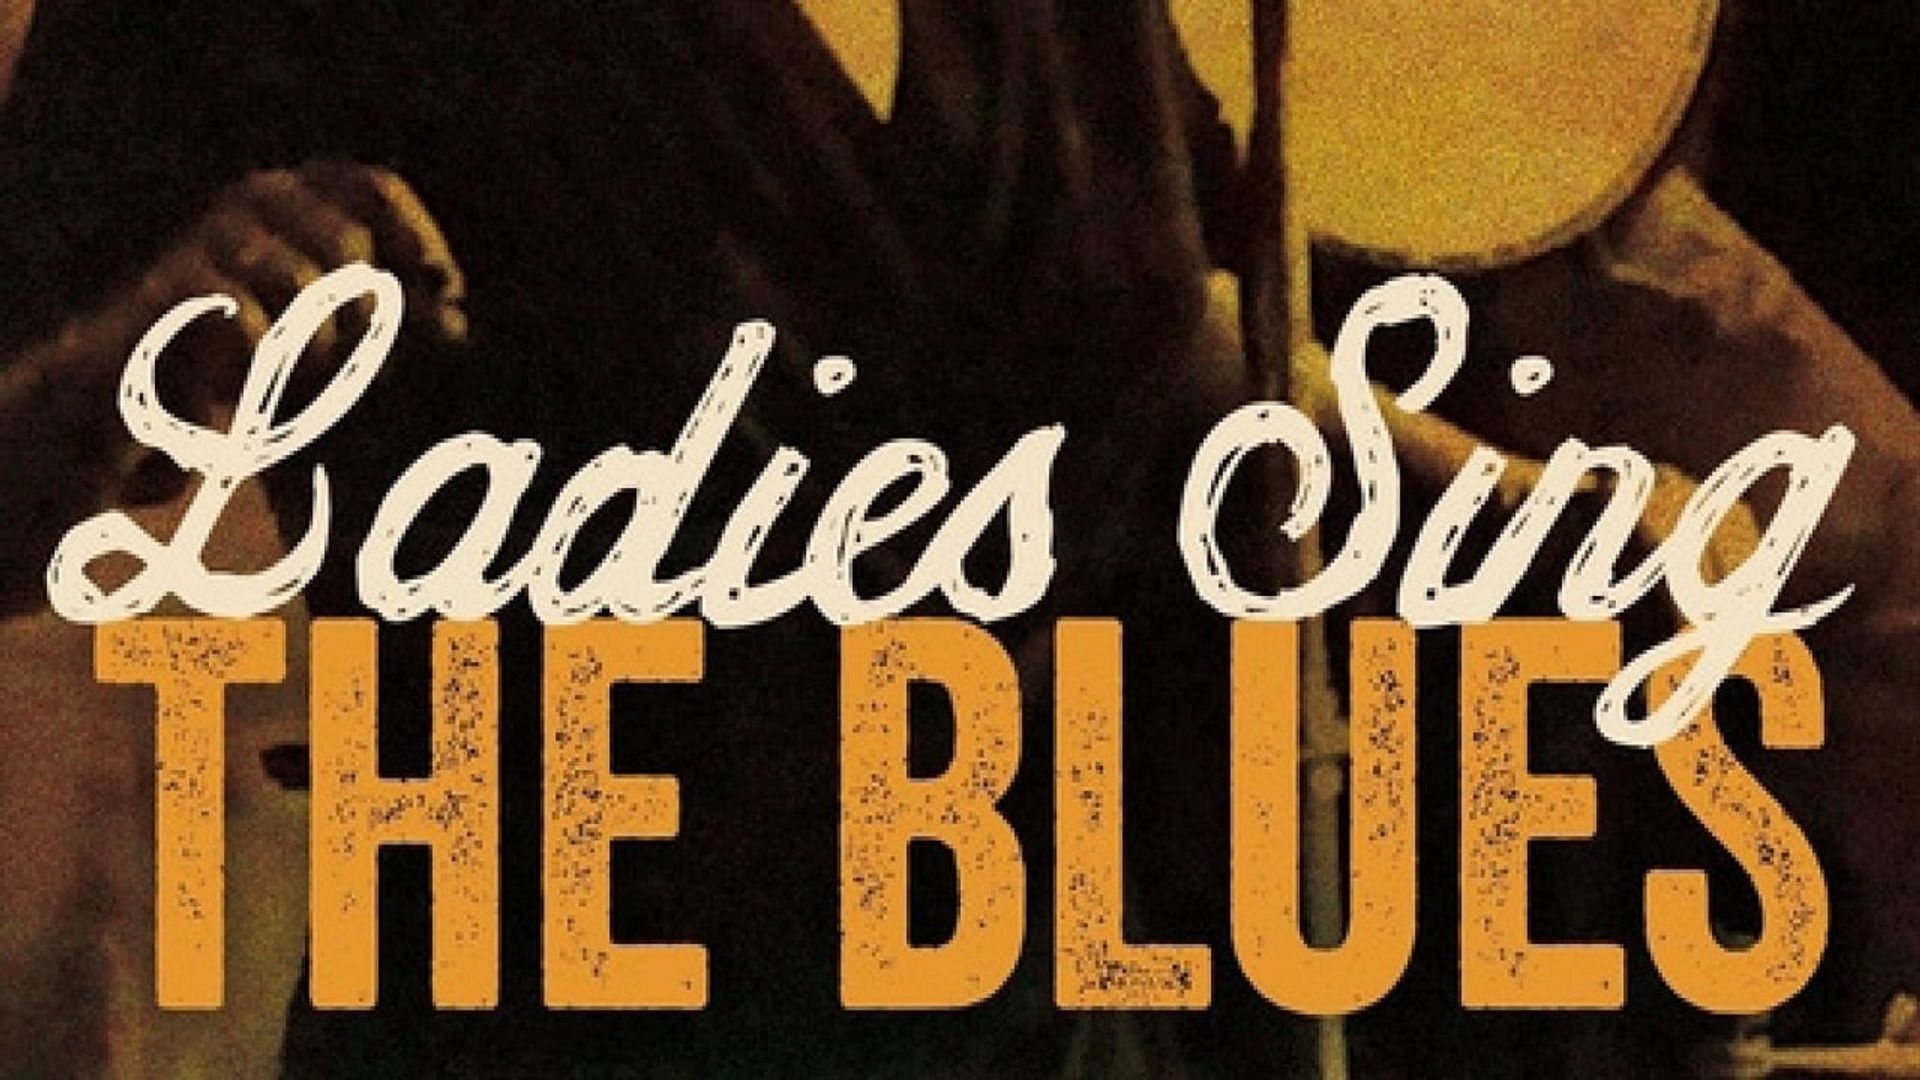 The Ladies Sing the Blues background